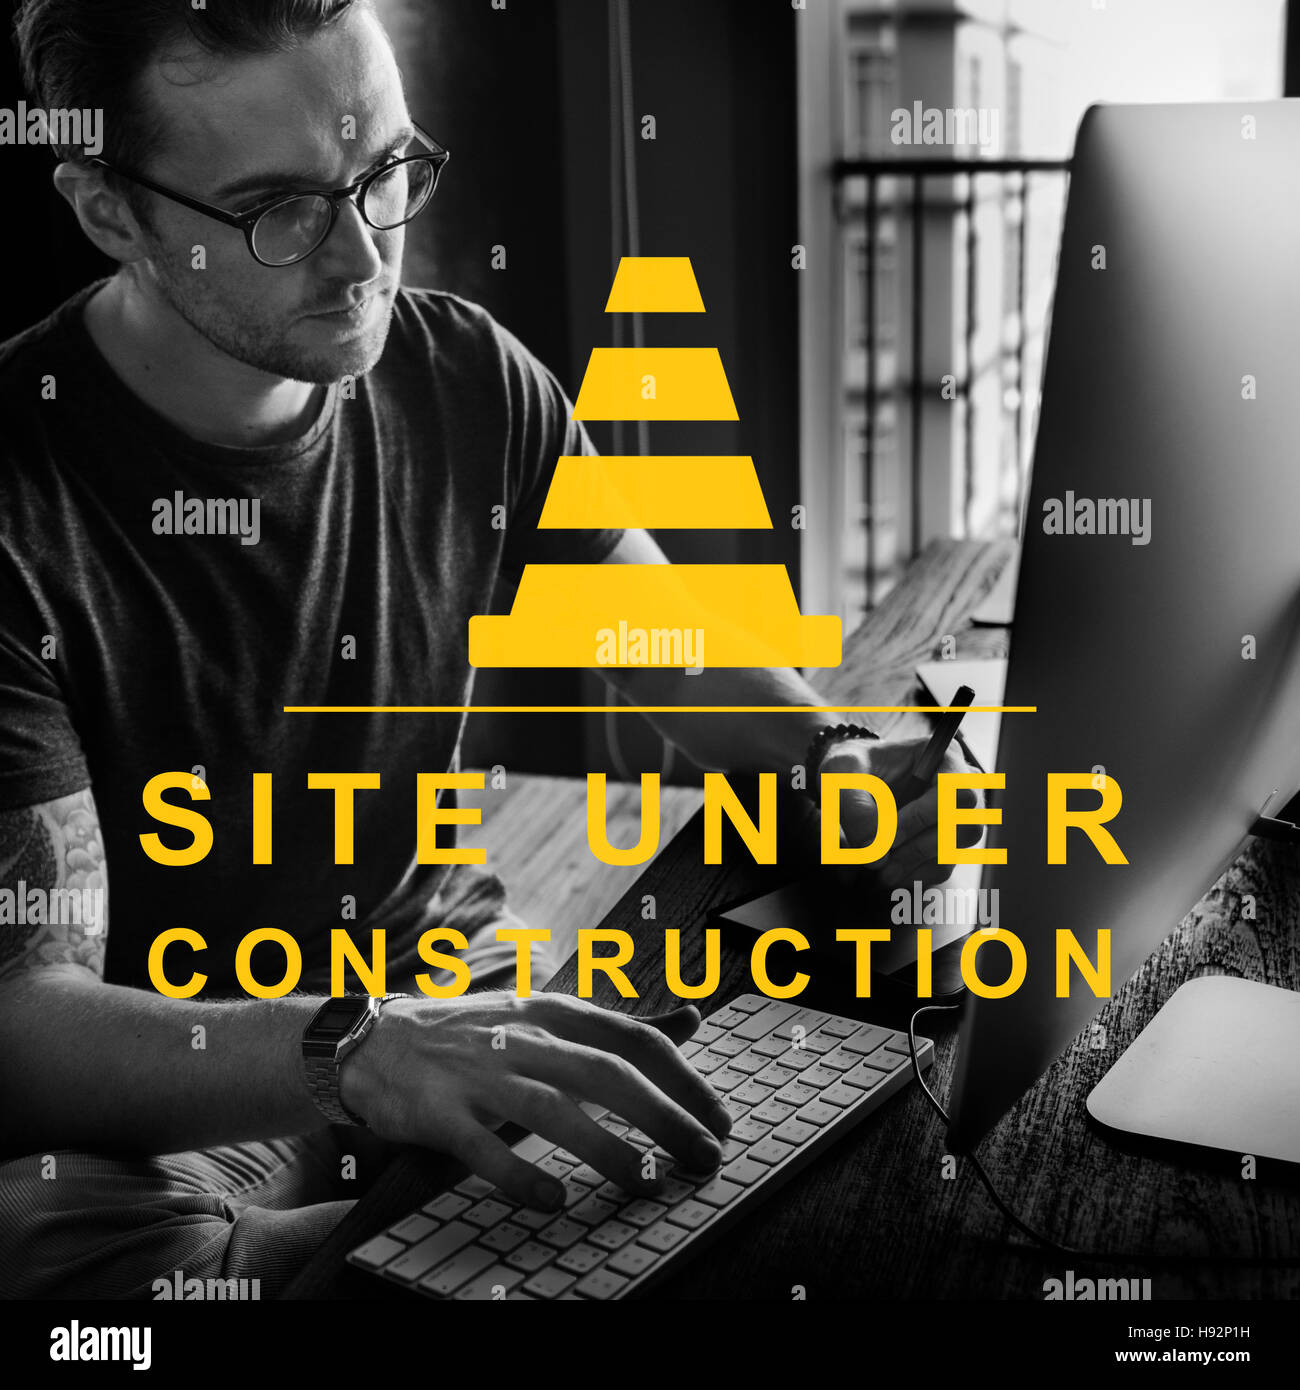 Constuction Hammer Wedge Website Webpage Concept Stock Photo